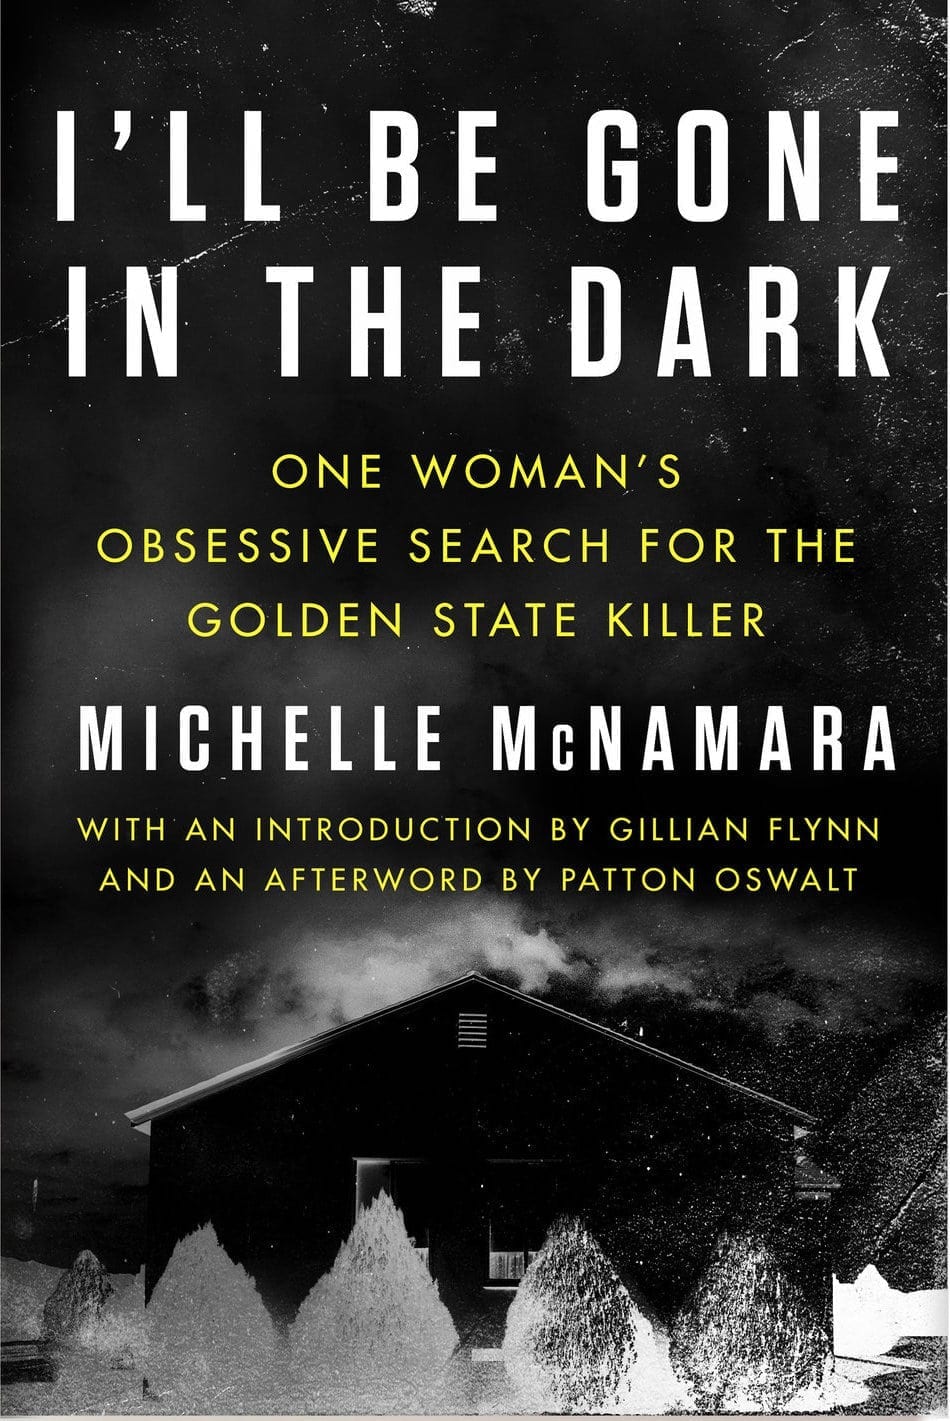 I’ll Be Gone in the Dark: One Woman’s Obsessive Search for the Golden State Killer by Michelle McNamara